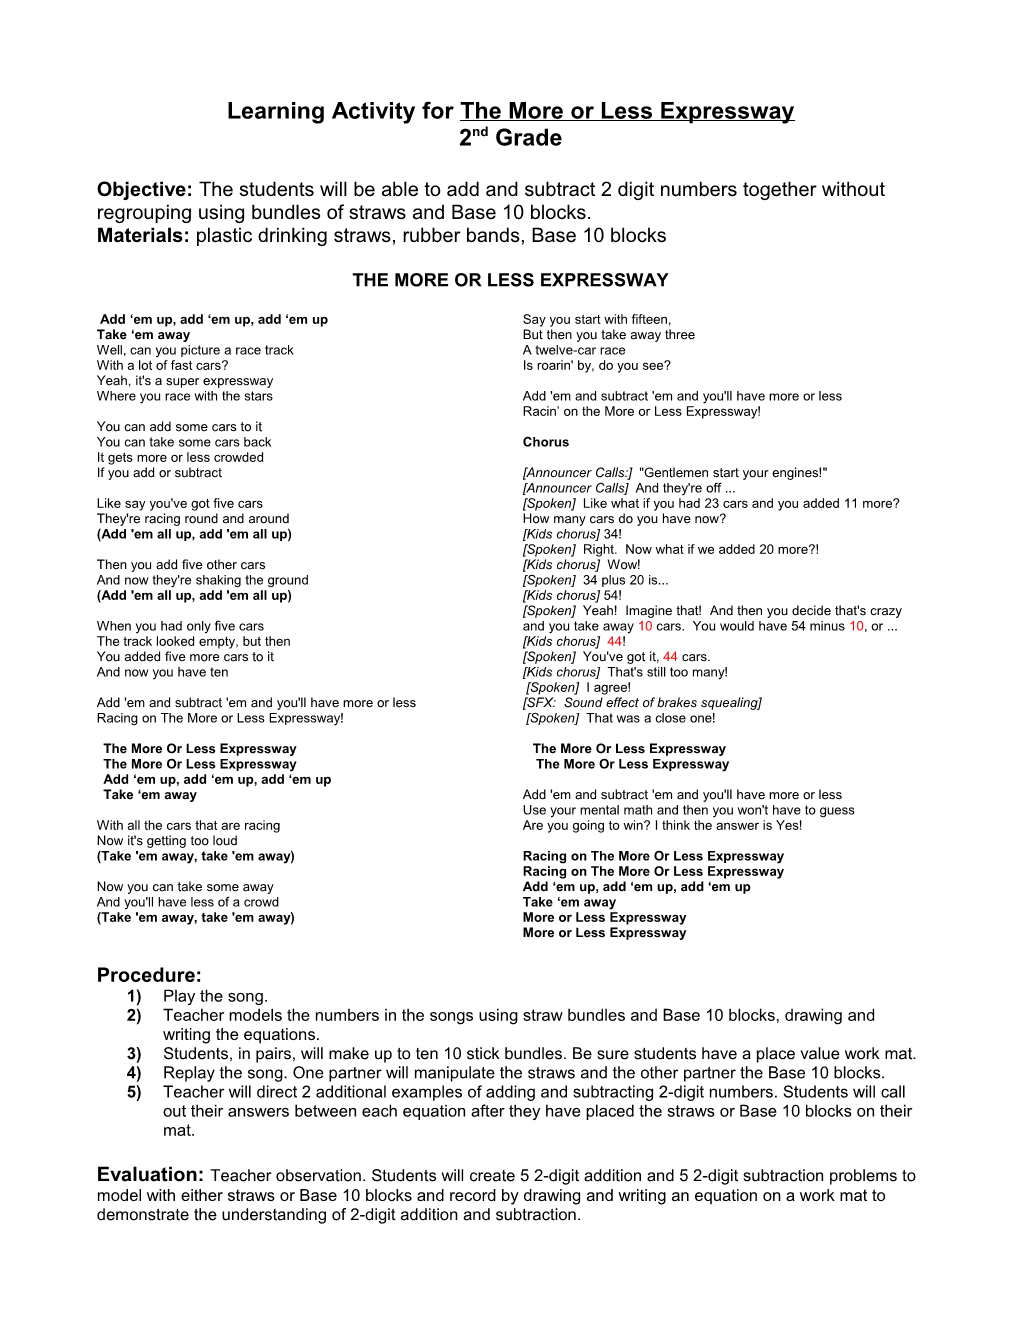 Learning Activity for (Song Title) s2